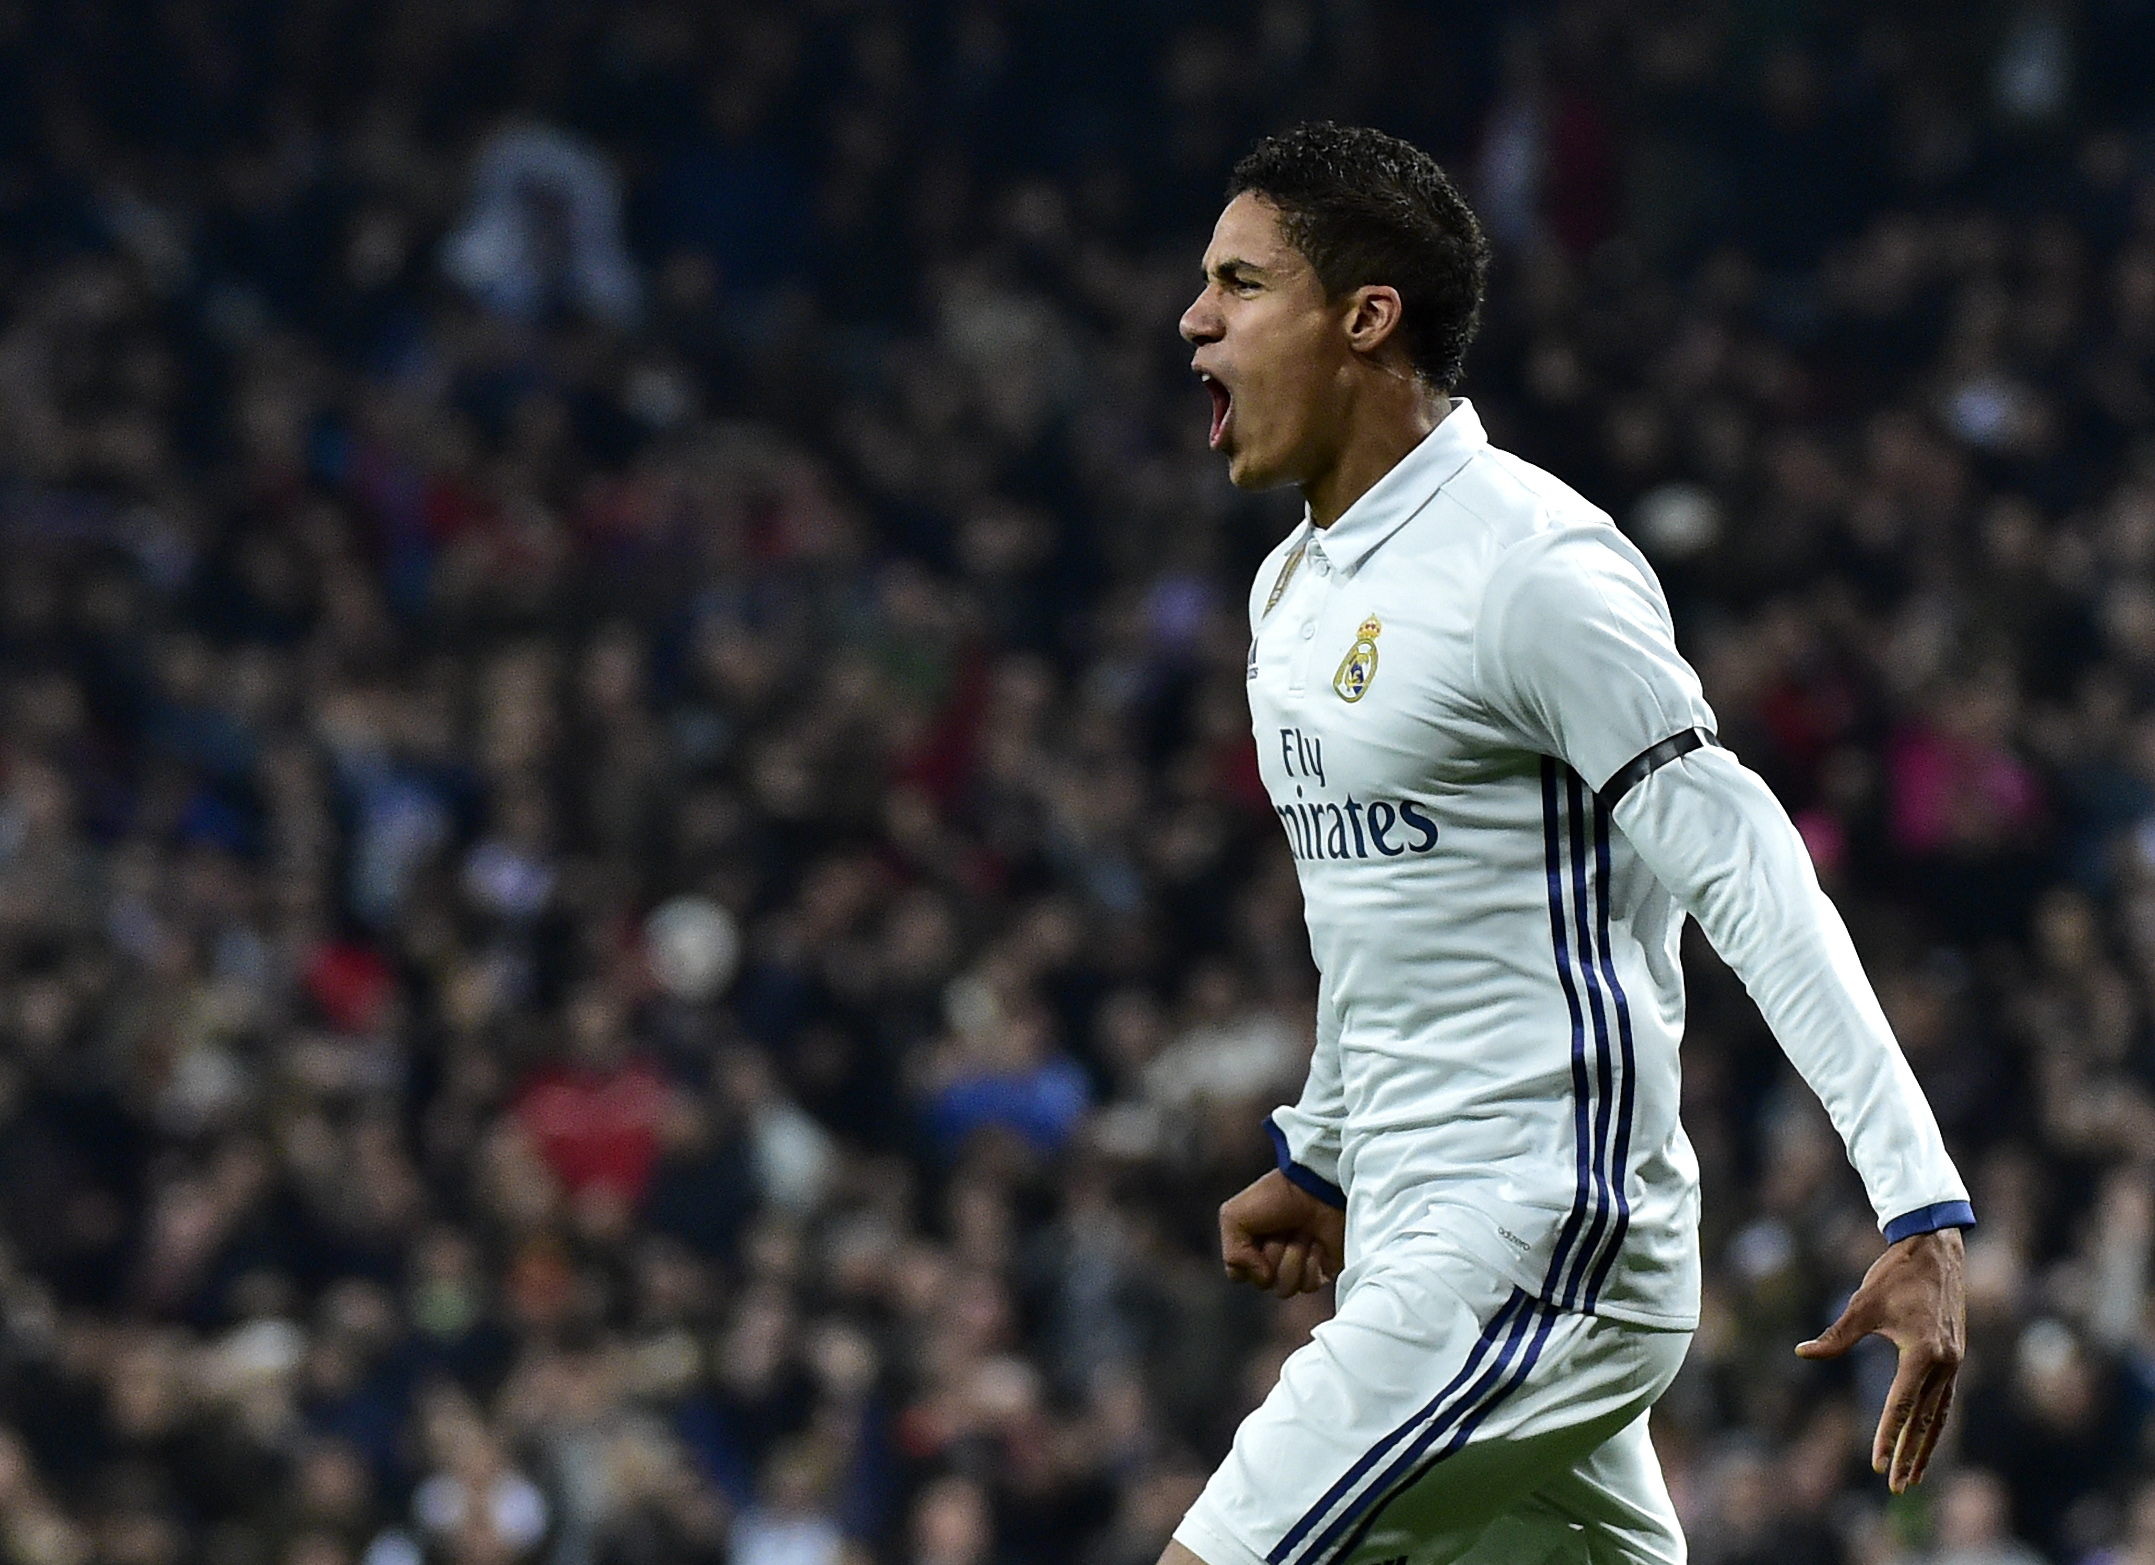 Real Madrid's French defender Raphael Varane celebrates after scoring during the Spanish Copa del Rey (King's Cup) round of 16 first leg football match Real Madrid CF vs Sevilla FC at the Santiago Bernabeu stadium in Madrid on January 4, 2017. / AFP / GERARD JULIEN        (Photo credit should read GERARD JULIEN/AFP/Getty Images)